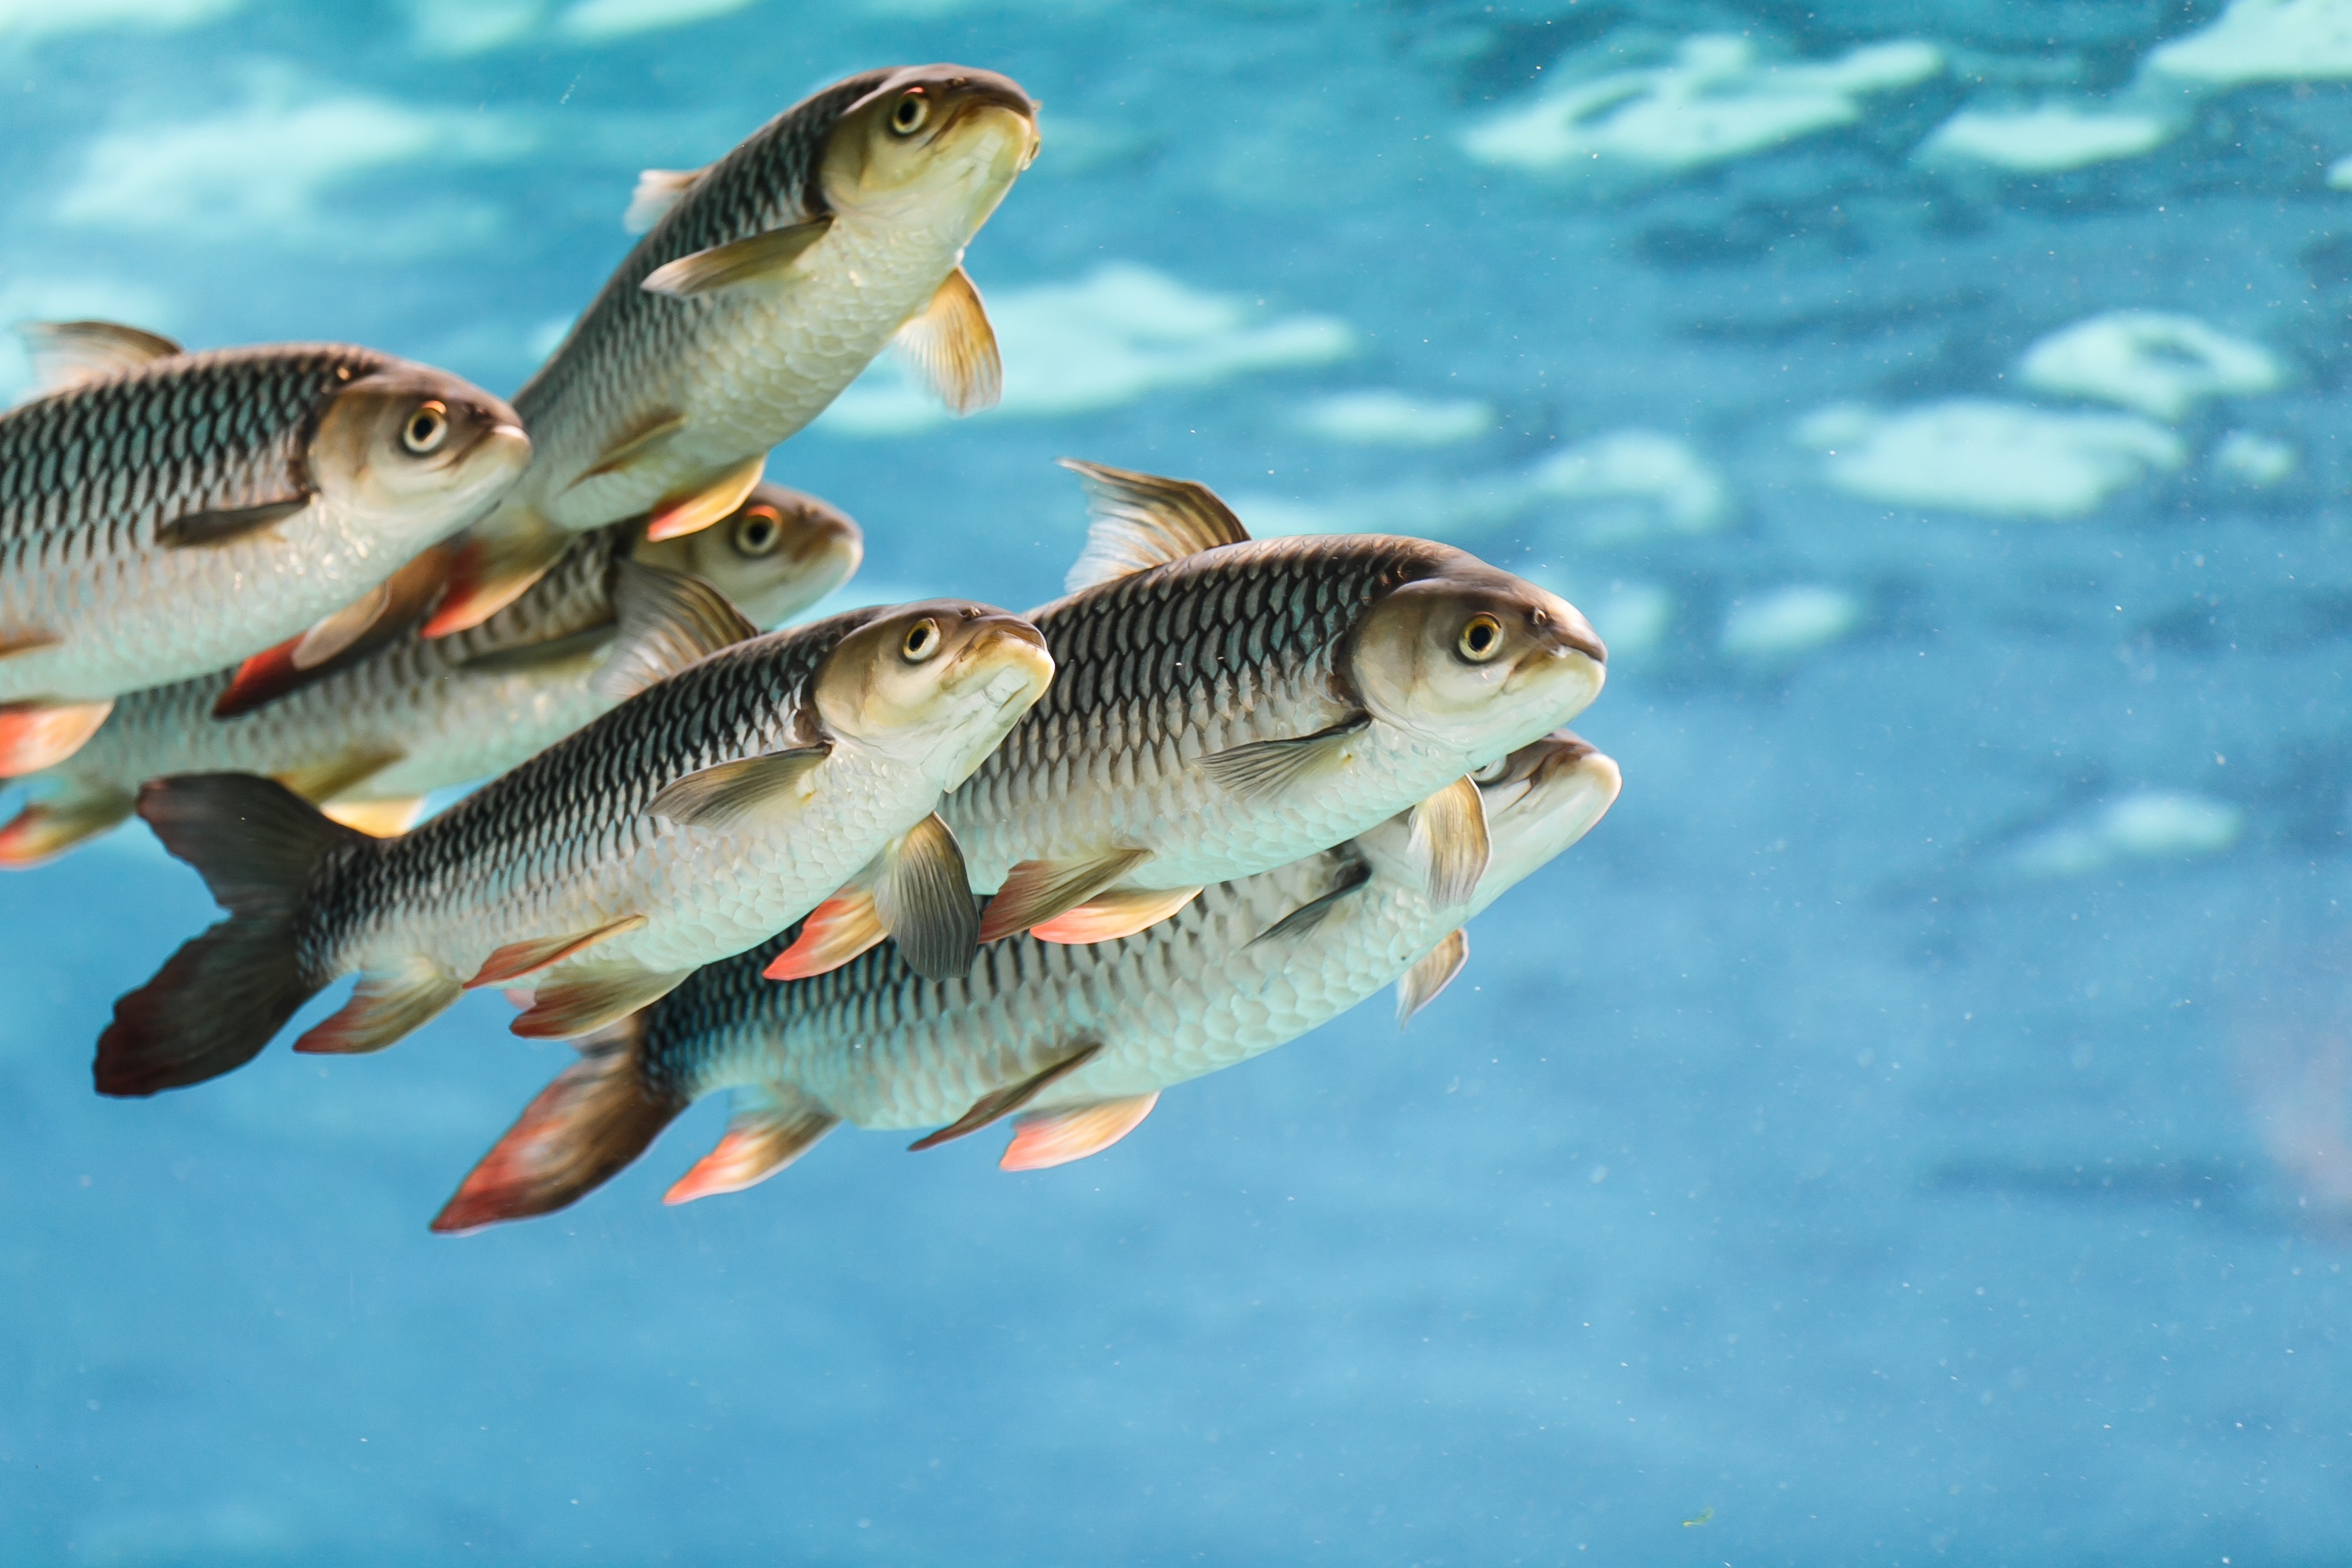 Fish breeding – a new phase of profitable business in Kazakhstan